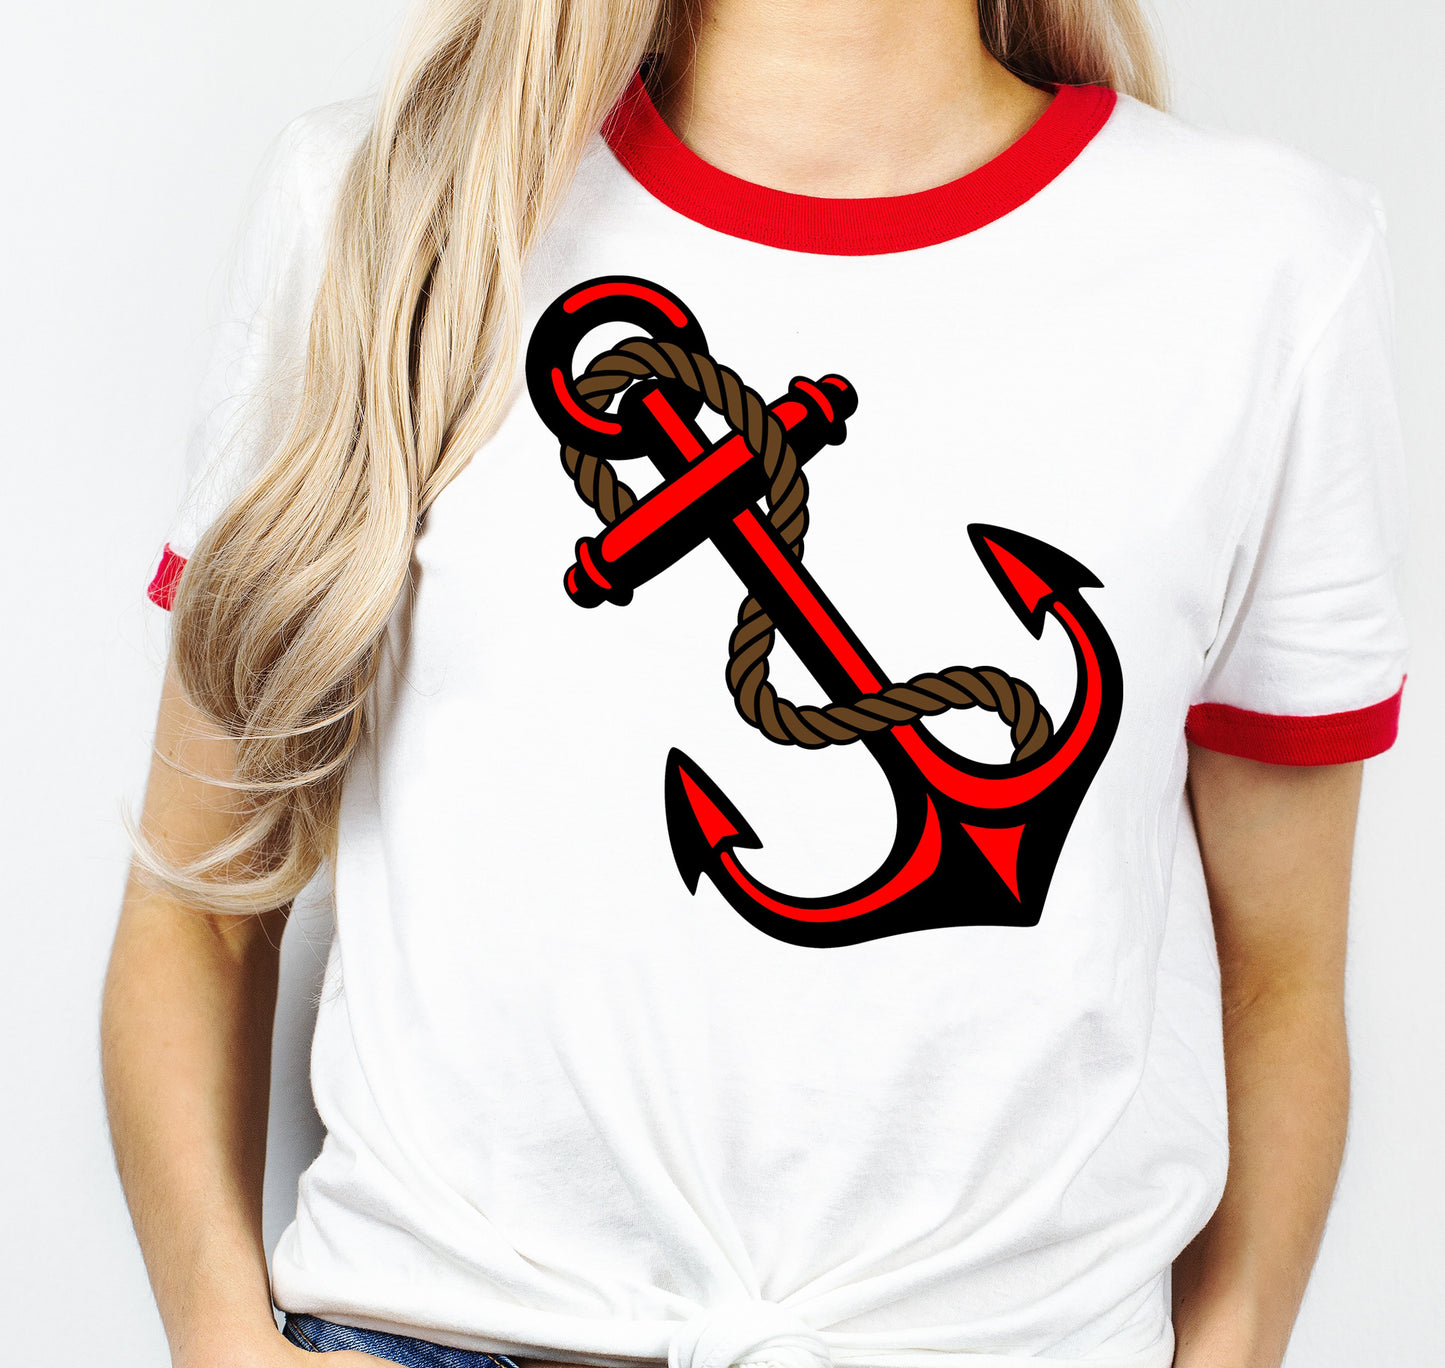 Anchors Away! Red and White Ringer T-Shirt